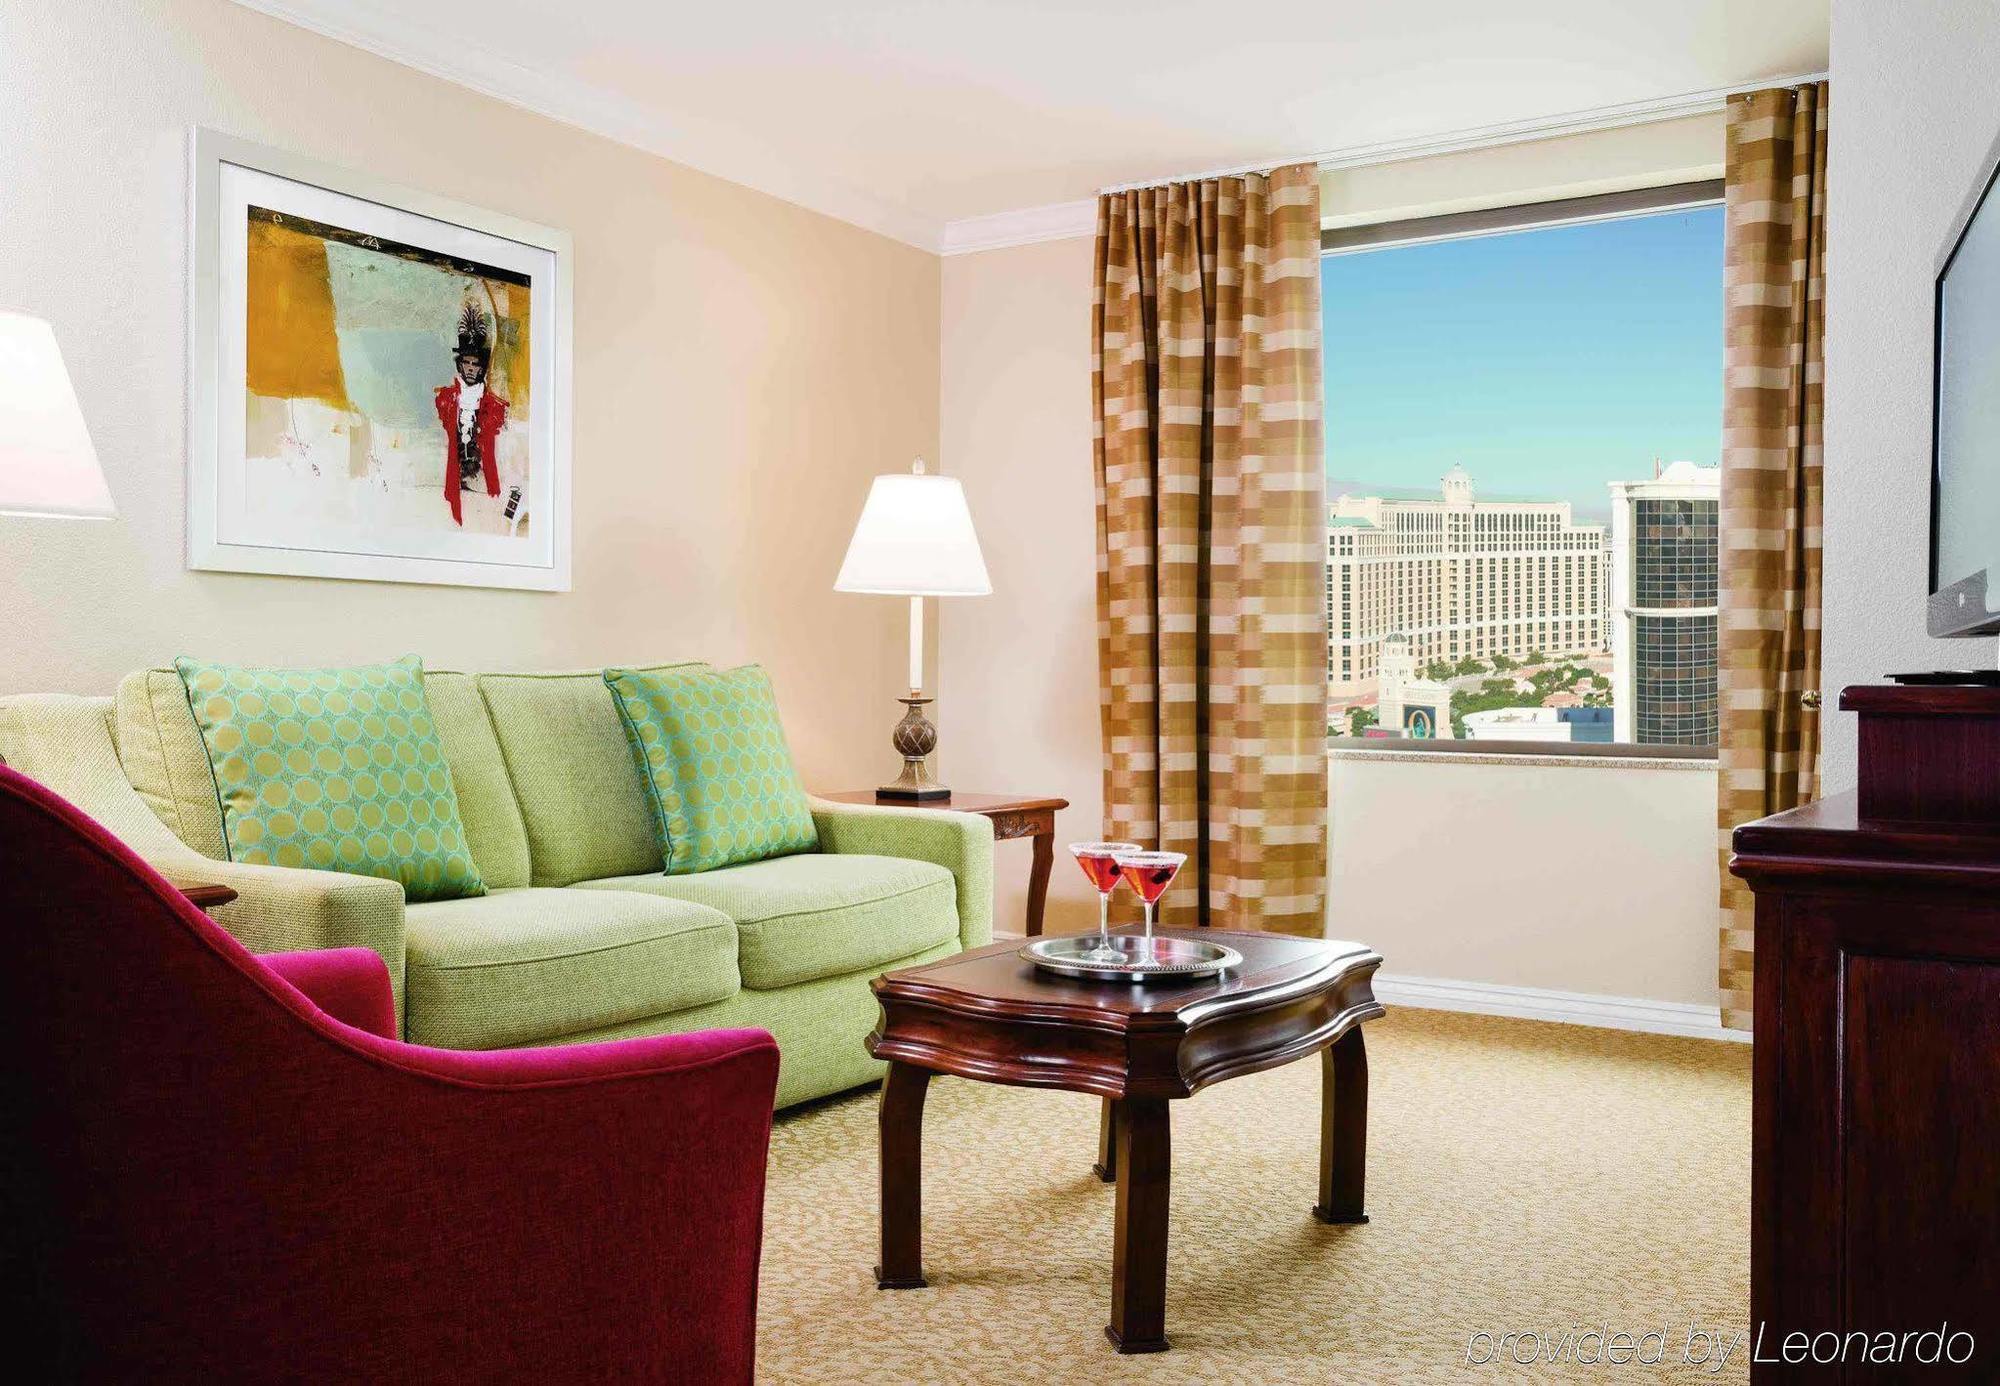 Marriott Vacation Club Grand Chateau in Las Vegas, the United